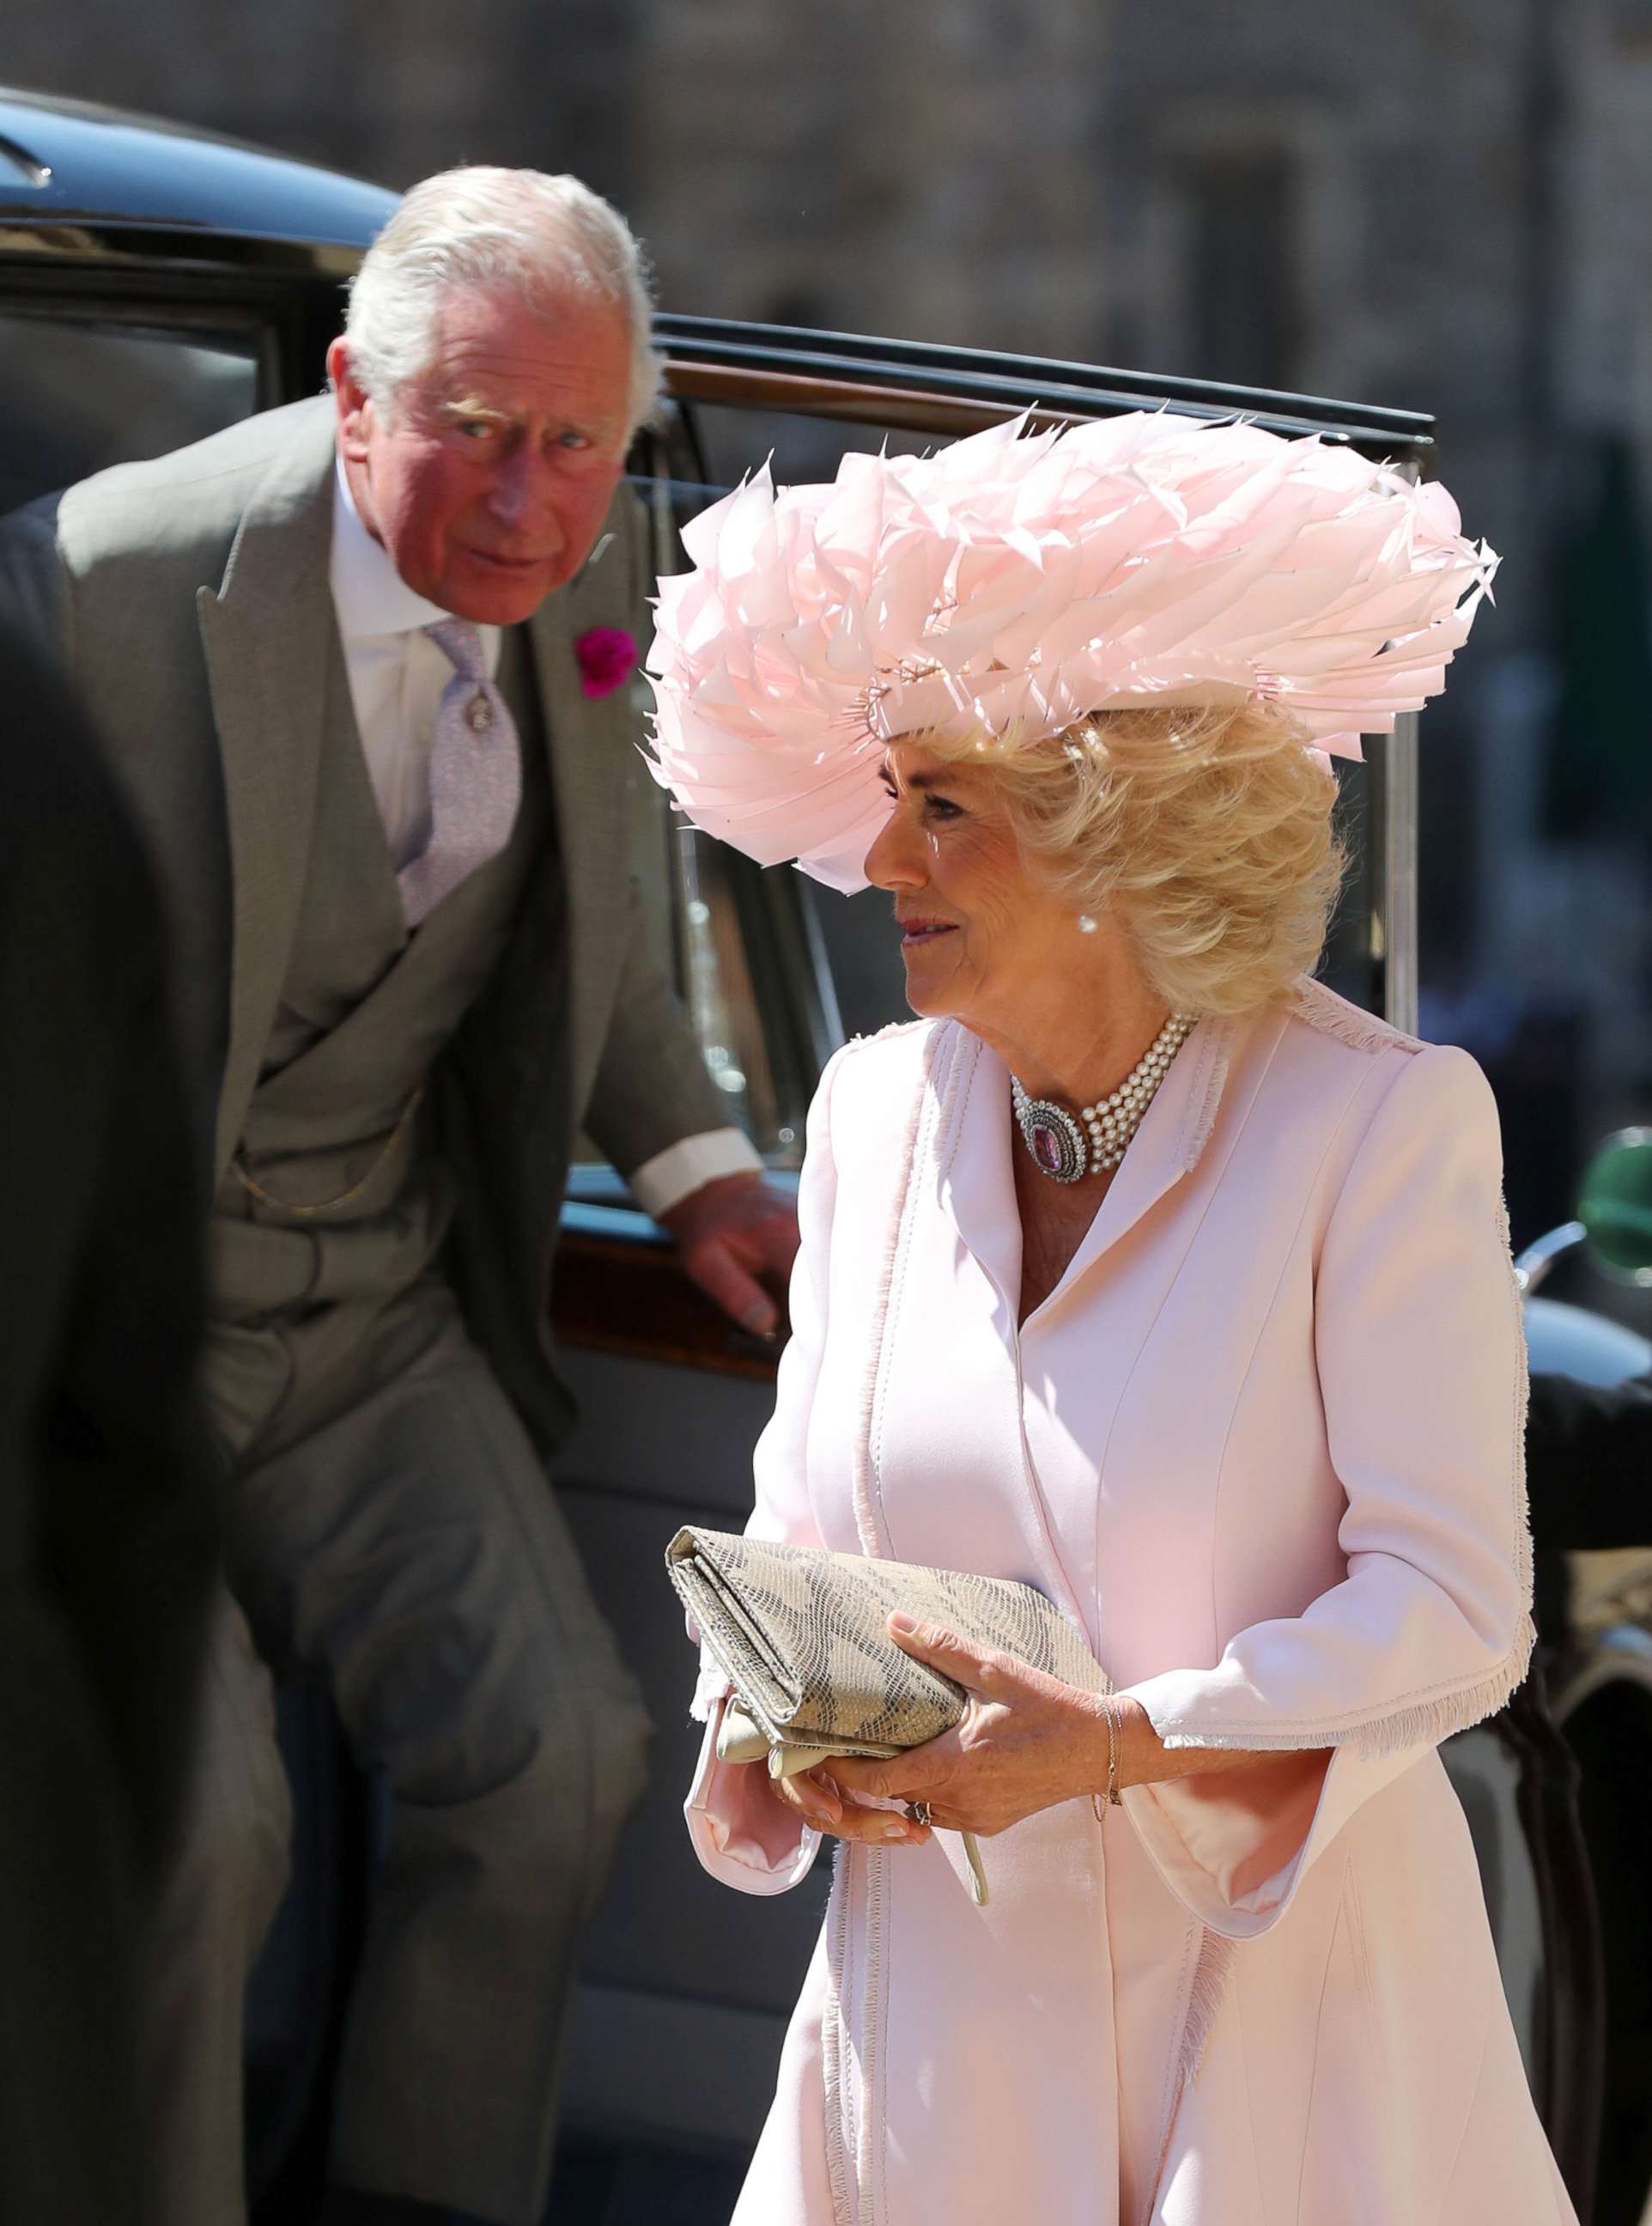 PHOTO: The Prince of Wales and Duchess of Cornwall arrive at St George's Chapel at Windsor Castle for the wedding of Meghan Markle and Prince Harry in Windsor, May 19, 2018. 